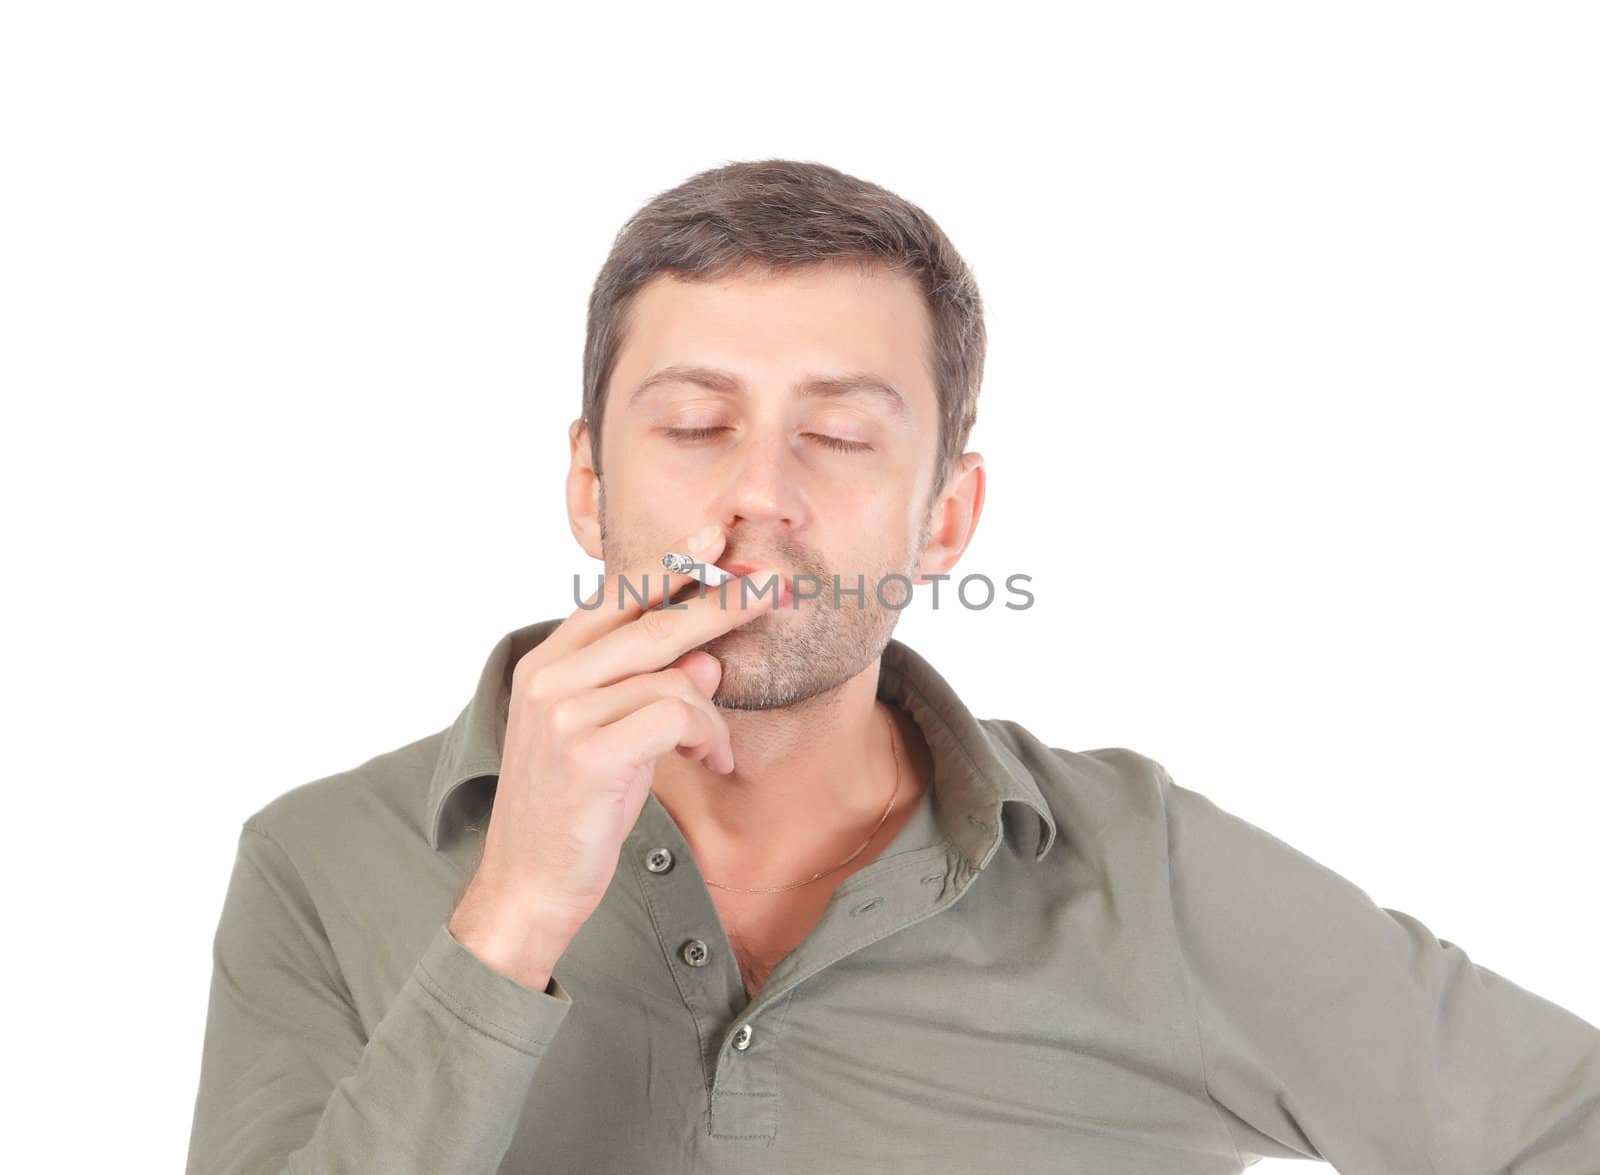 Satisfied man smoking with a blissful expression on his face and his eyes closed as he puffs away on a cigarette isolated on white